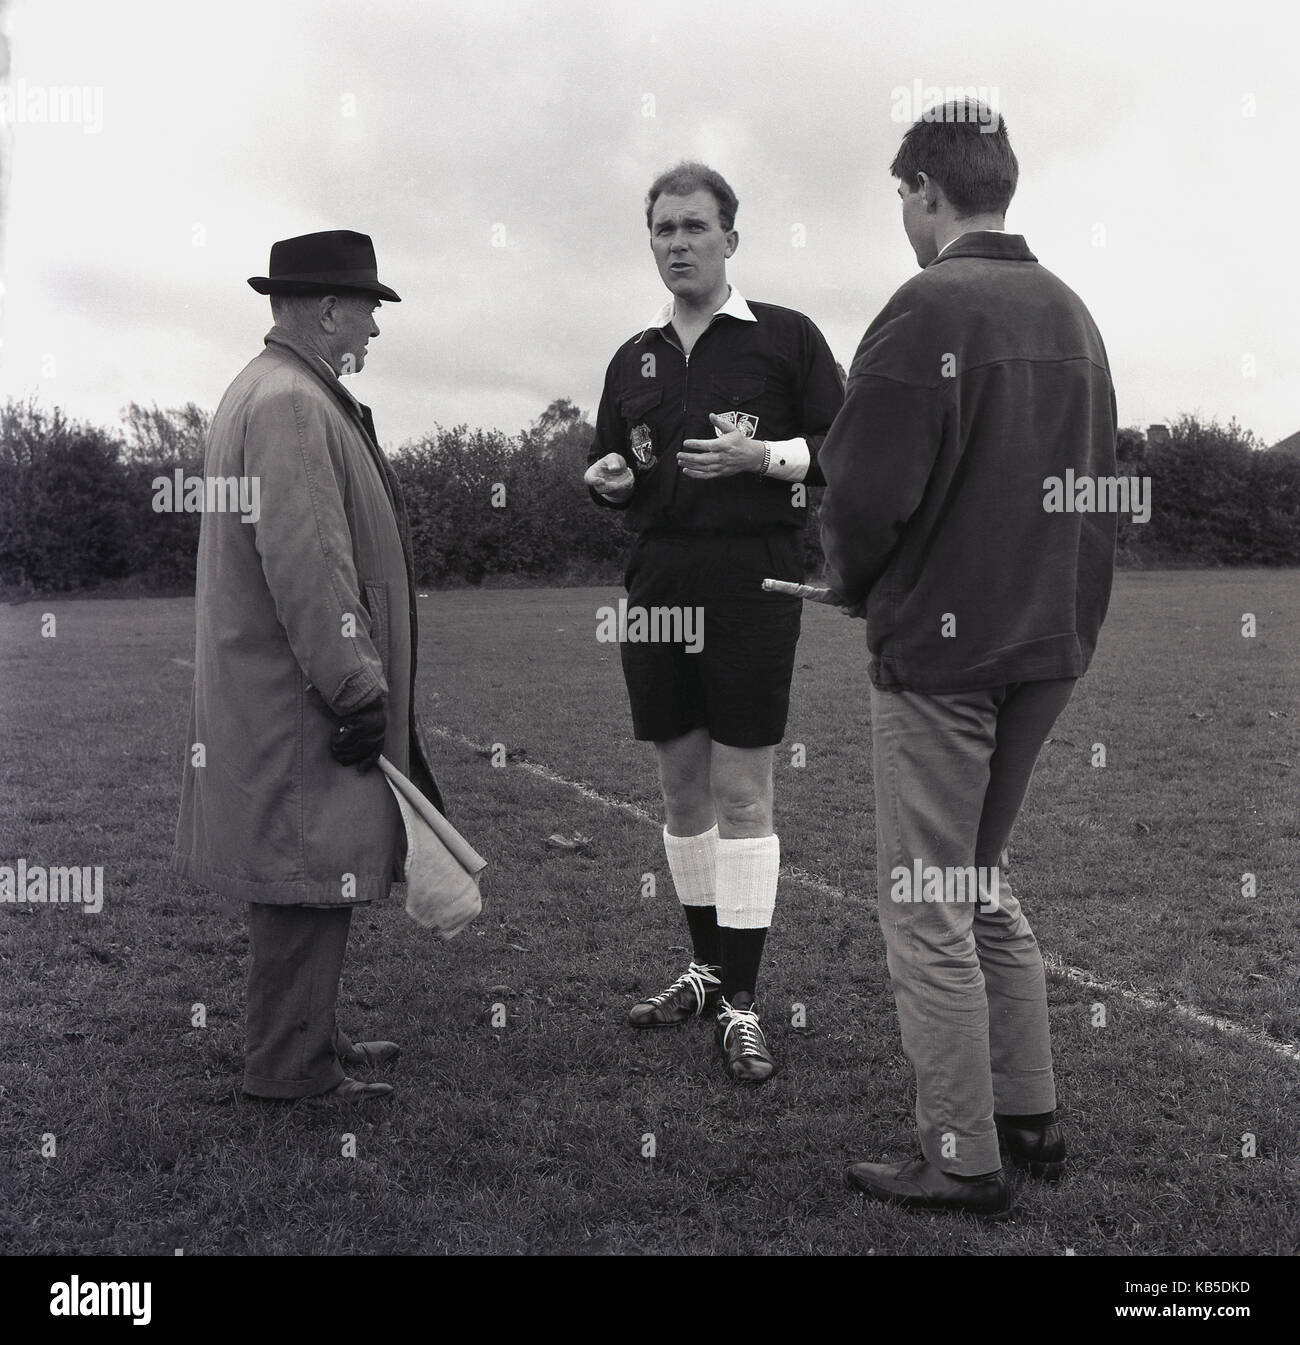 1960s, historical, amateur football referee talks to his two linesmen on the pitch before the match, England, UK. Stock Photo